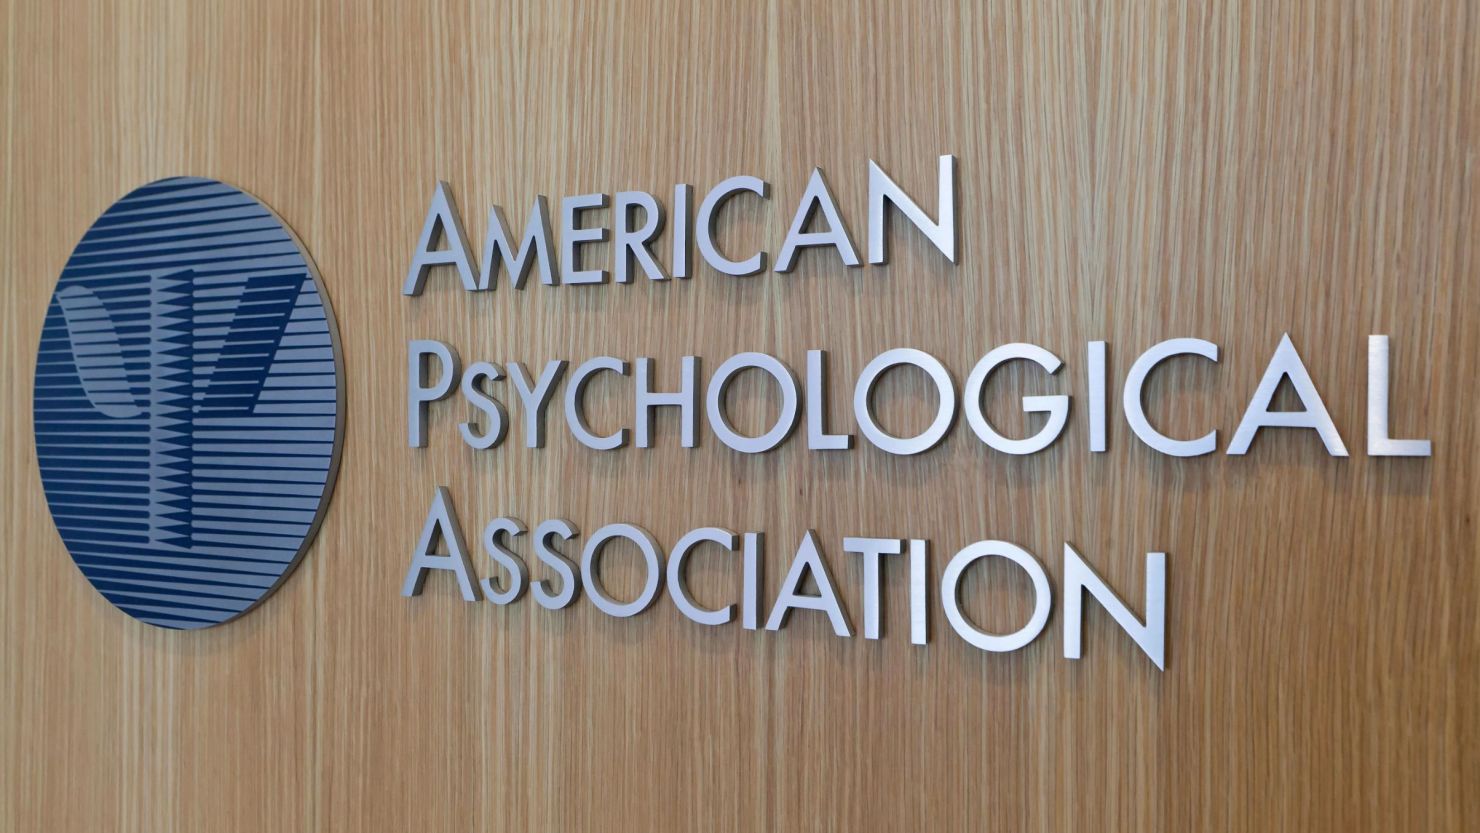 The American Psychological Association it has perpetuated racism for decades.